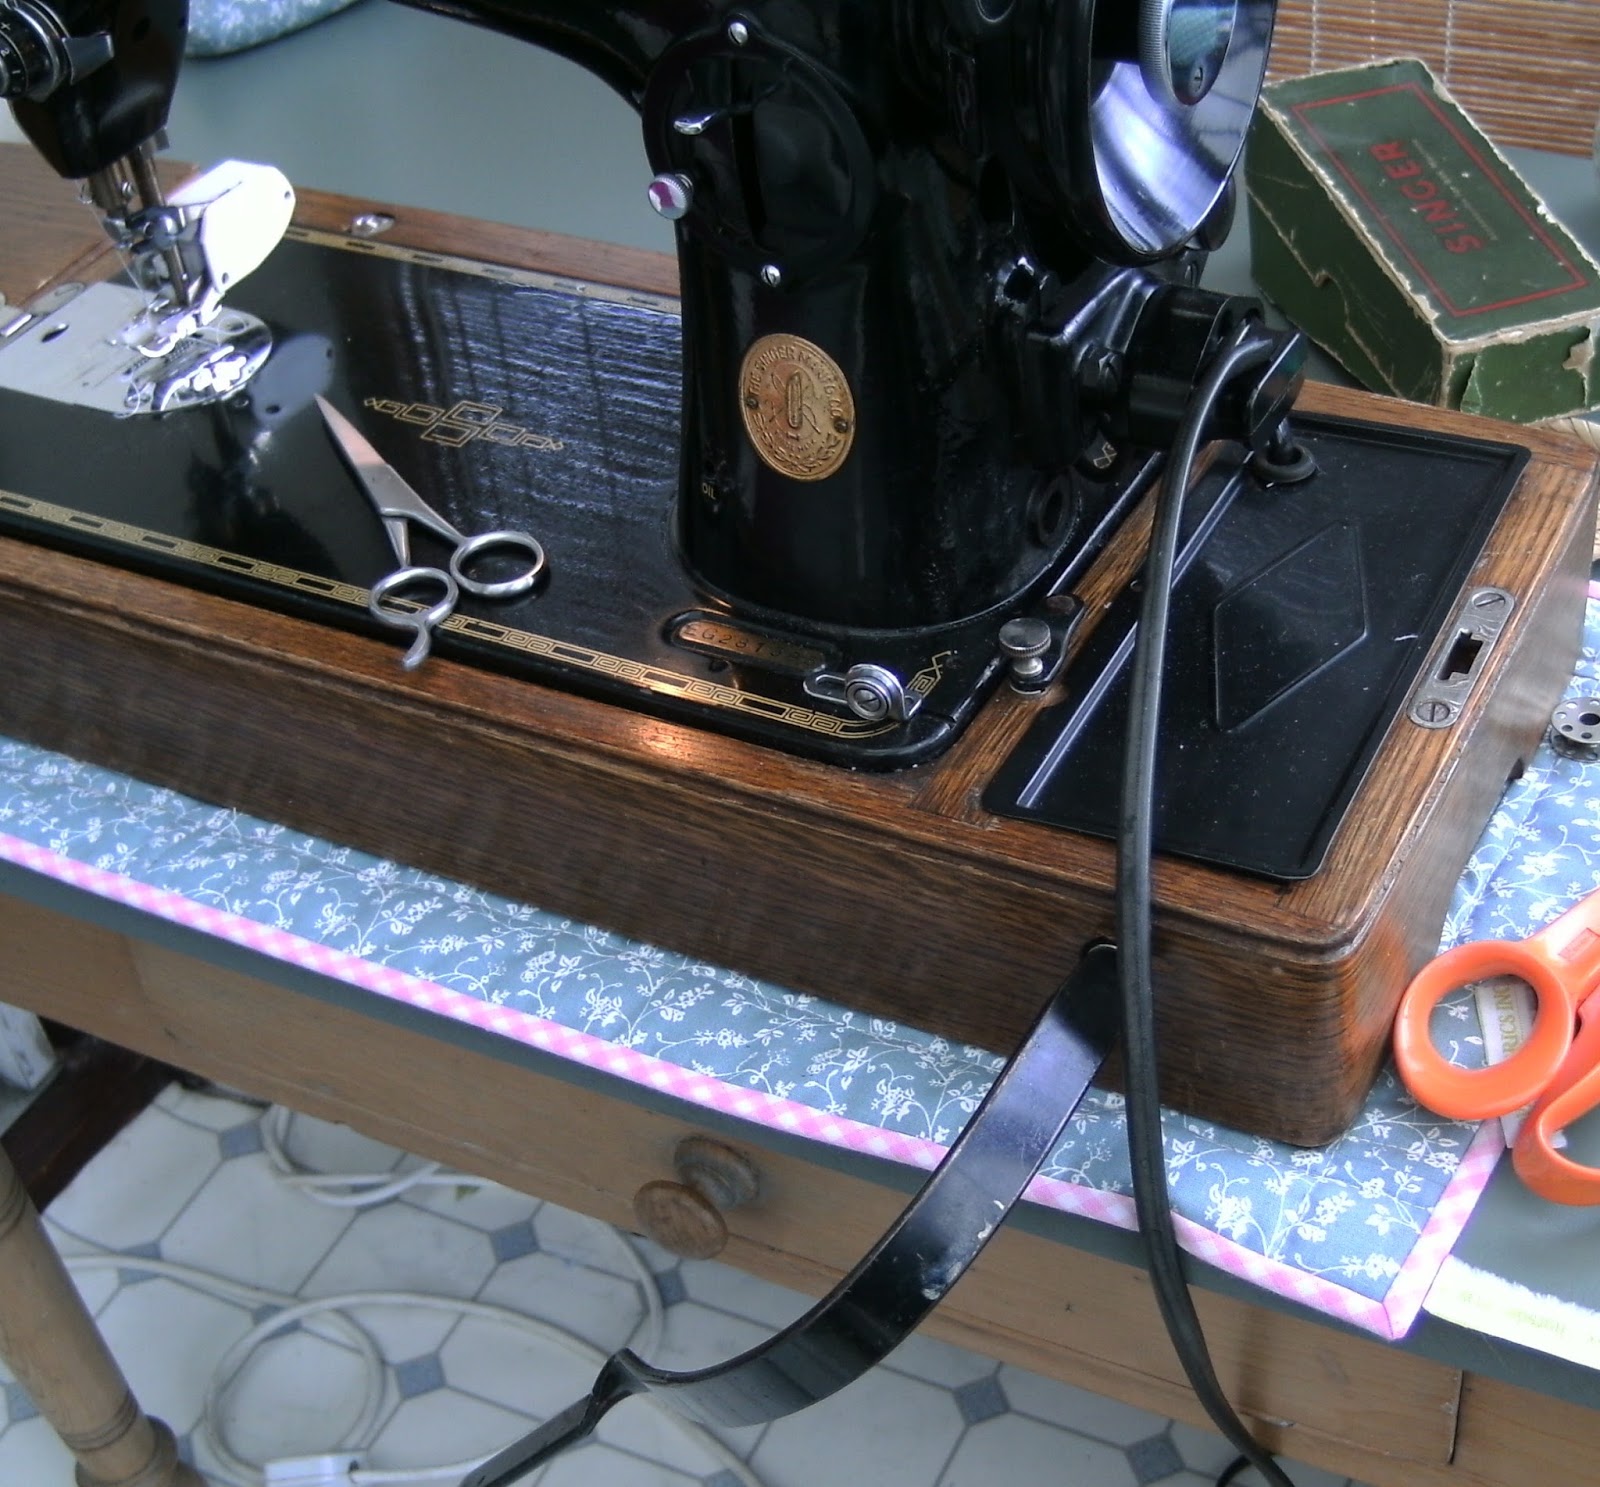 Singer knee lever sewing machines